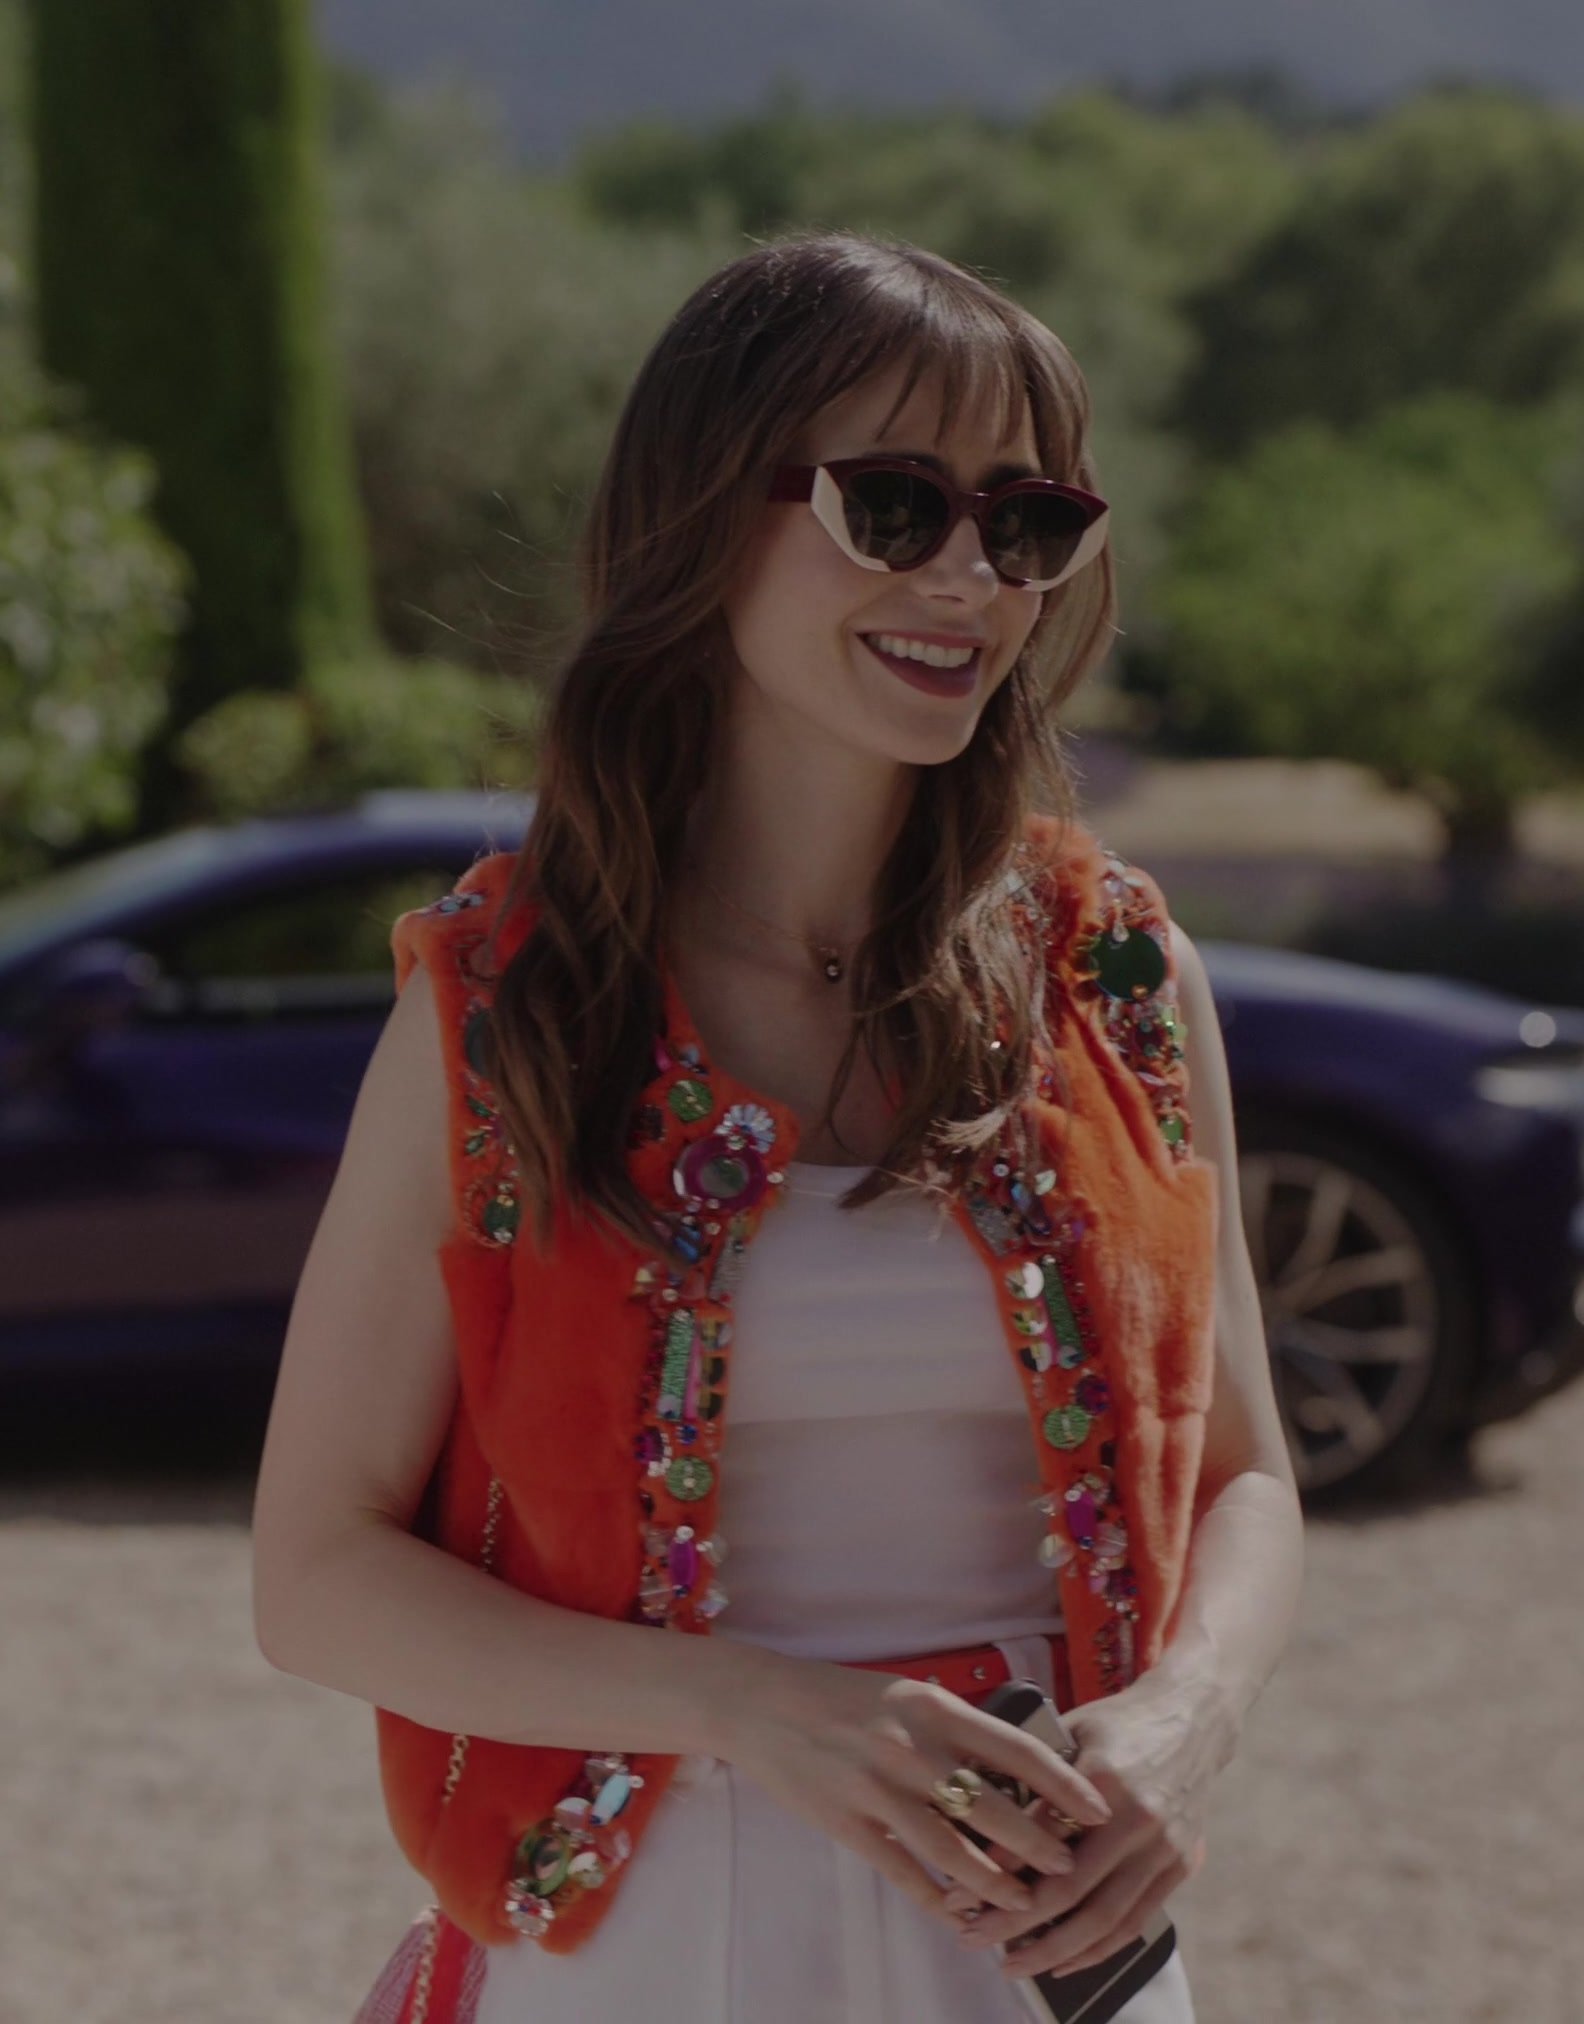 Worn on Emily in Paris TV Show - Orange Embellished Vest Worn by Lily Collins as Emily Cooper